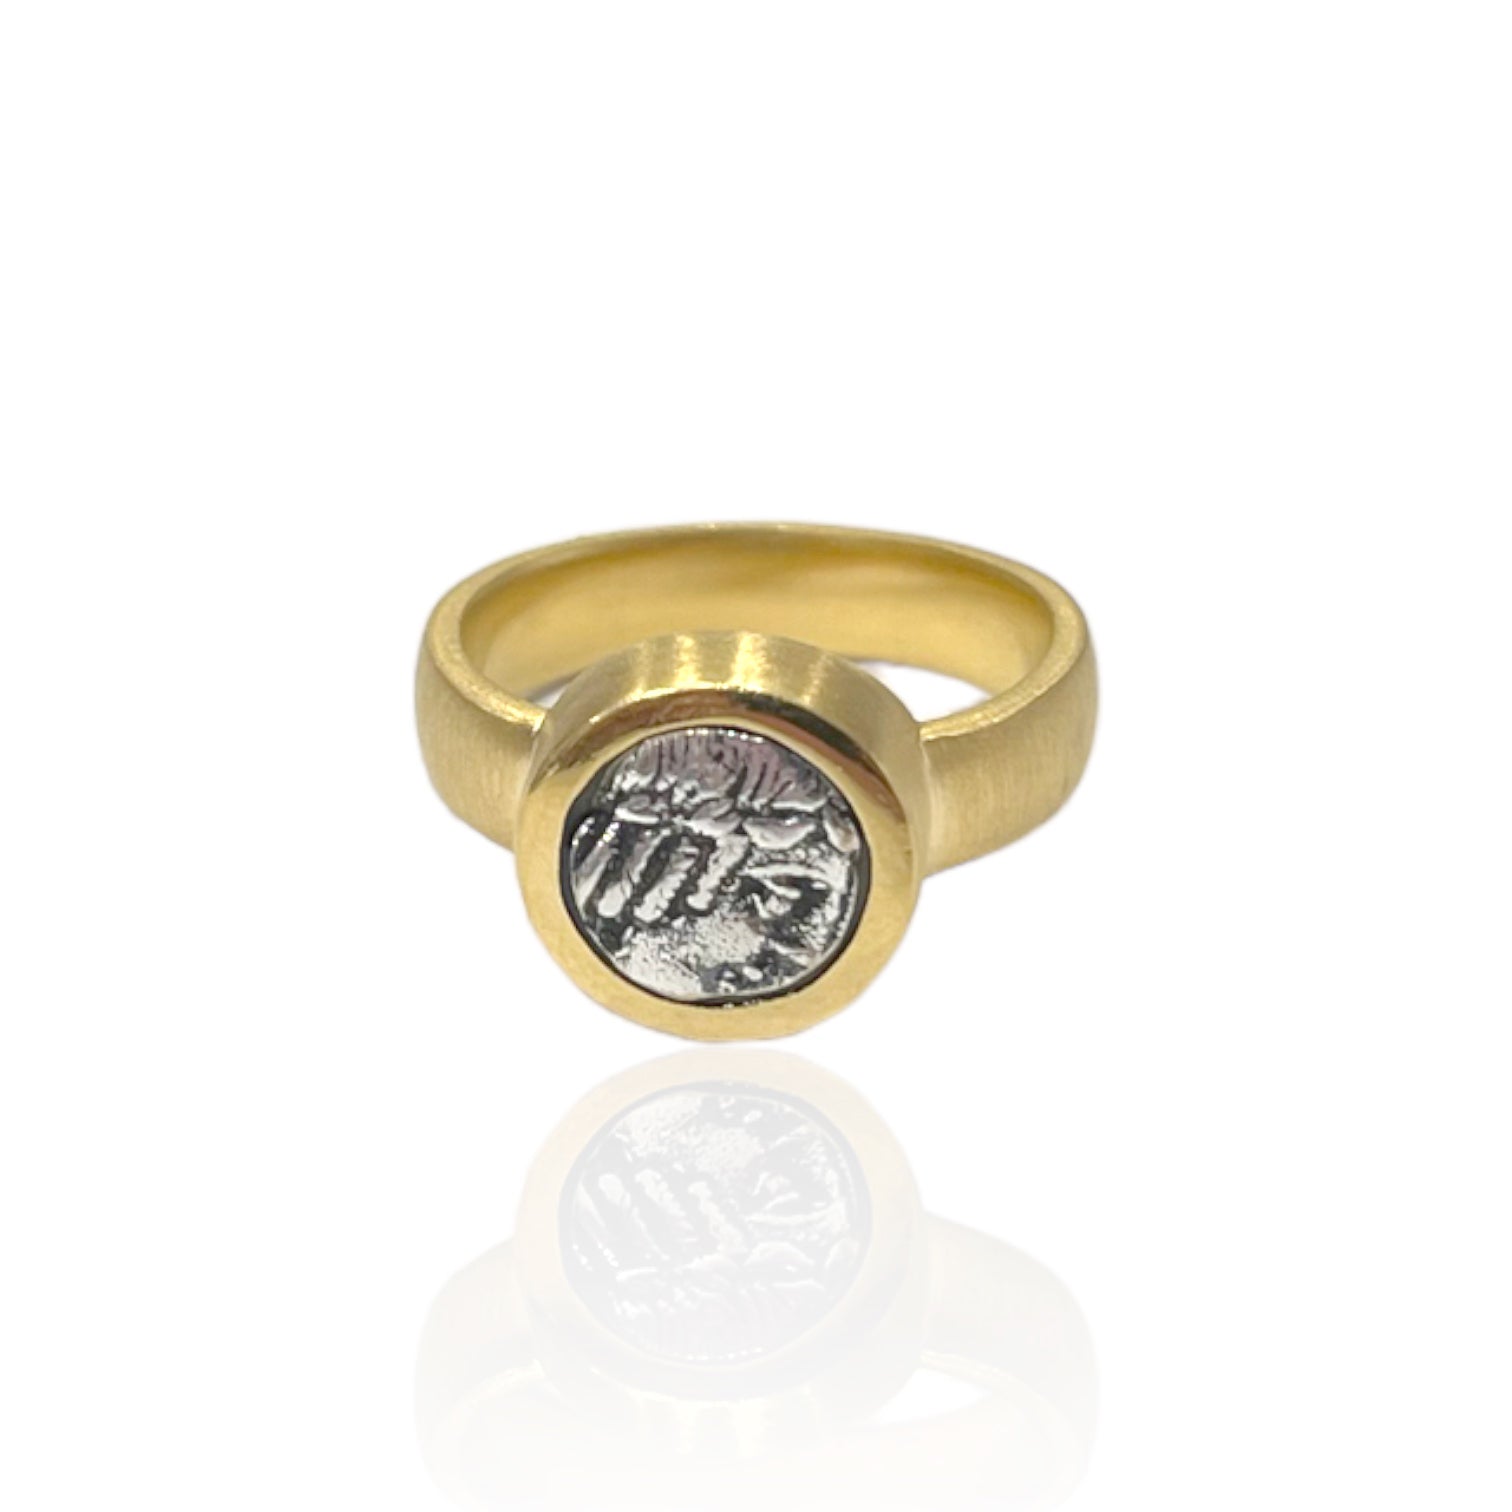 GOLD FLORA COIN RING